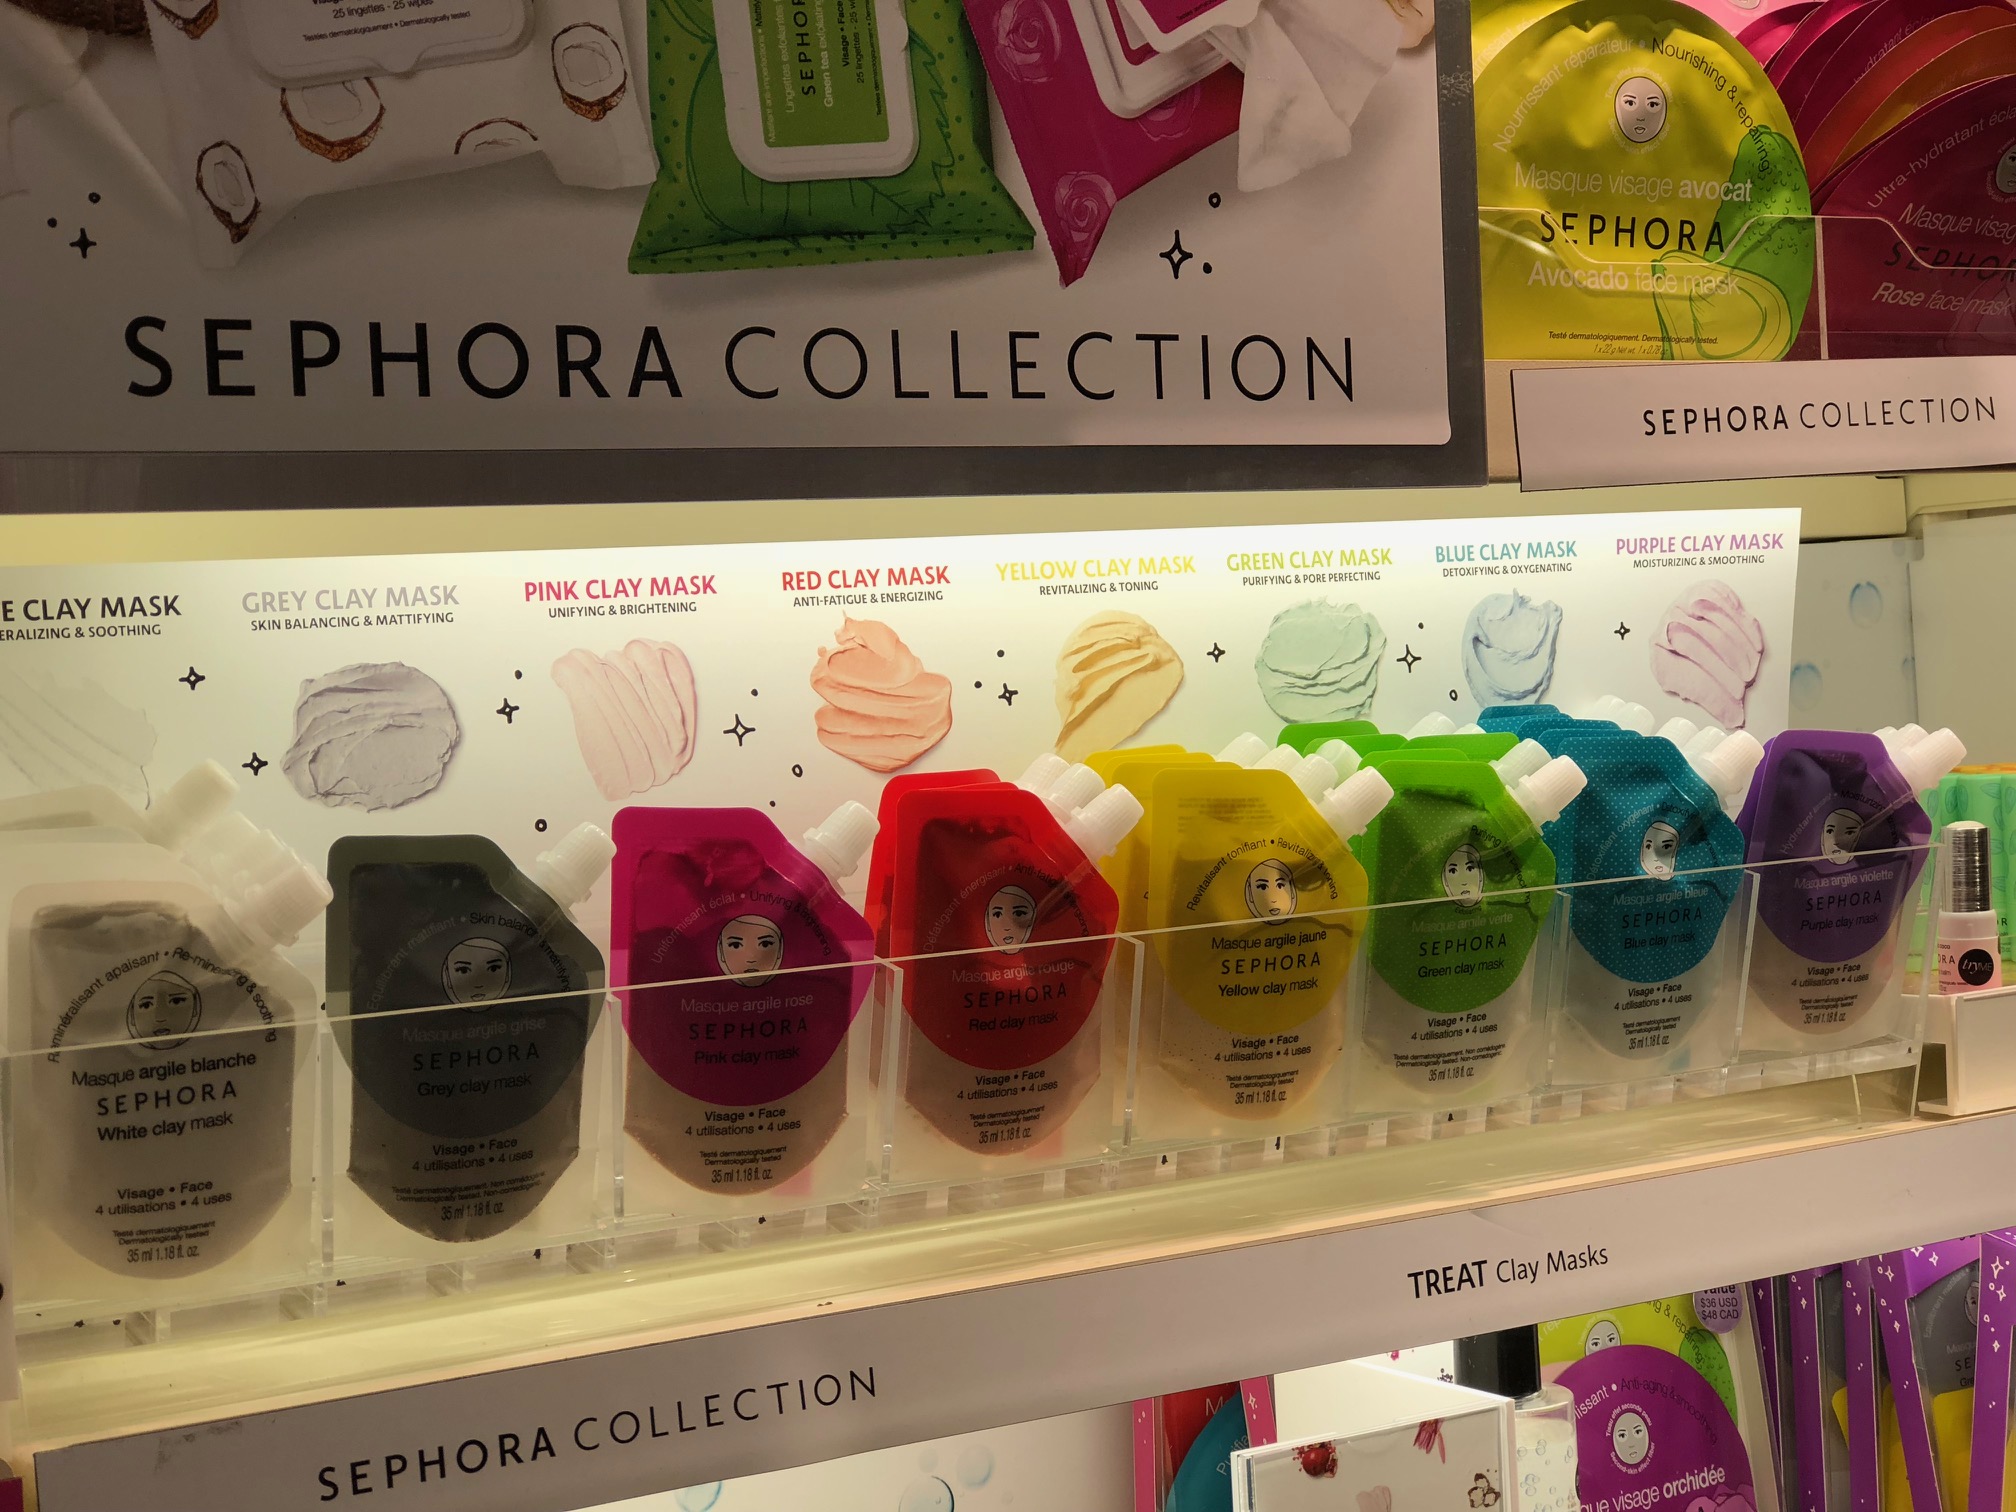 10 last-minute beauty gifts at Sephora in JCPenney: Sephora Collection clay masks